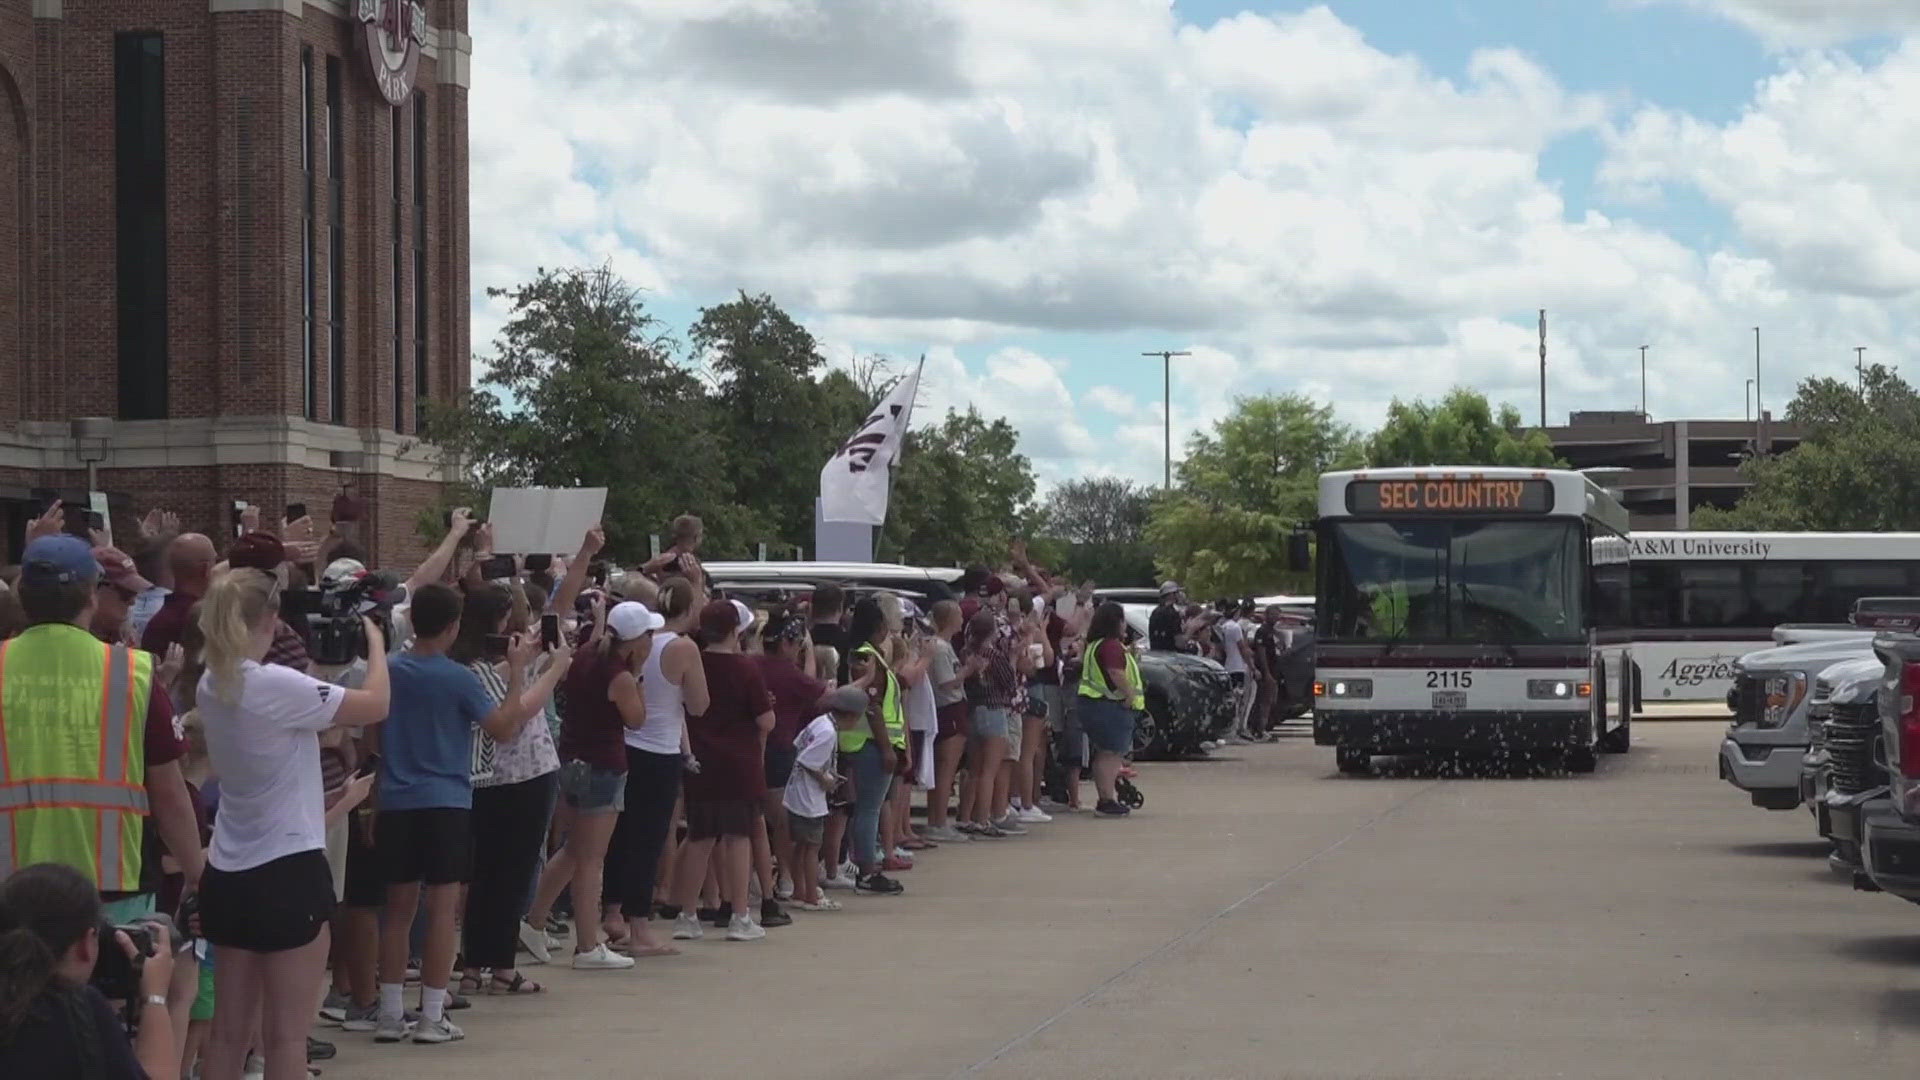 Although the Aggies fell to Tennessee for the National Championship, loyal fans were still waiting to welcome them home.